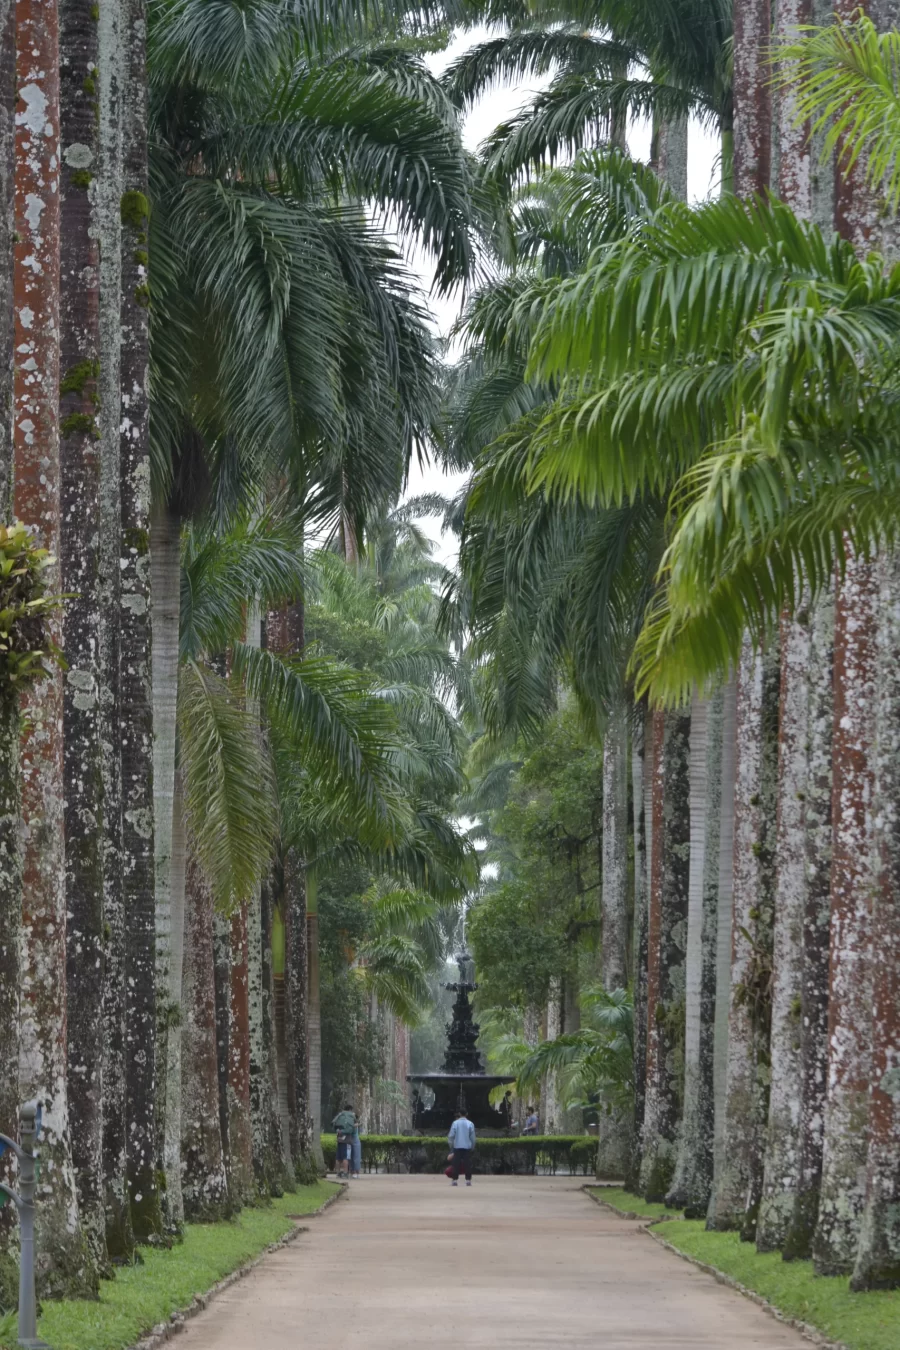 The botanical gardens' famous avenue of palm trees with a fountain in the centre